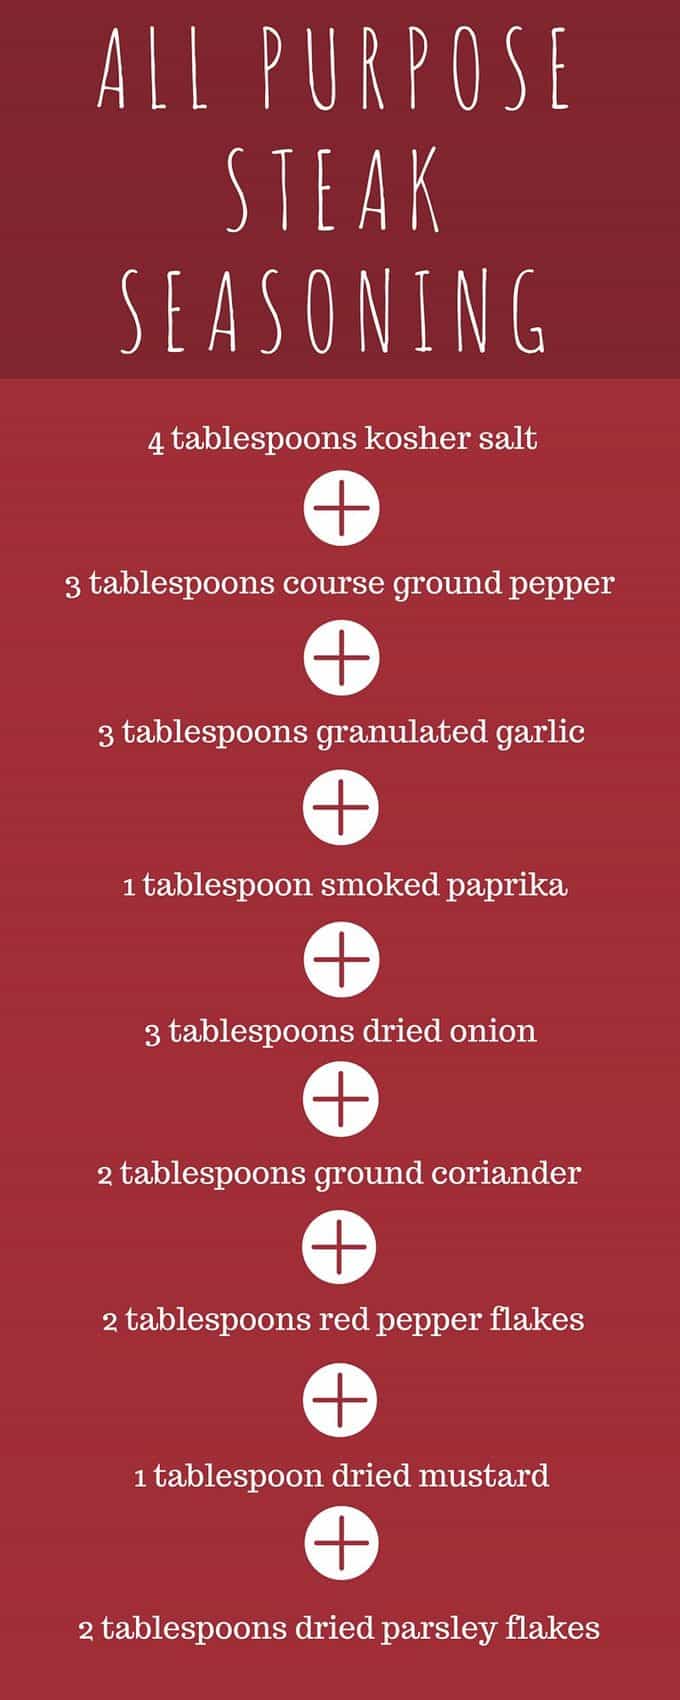 This all-purpose steakhouse seasoning blend infographic has the recipe!